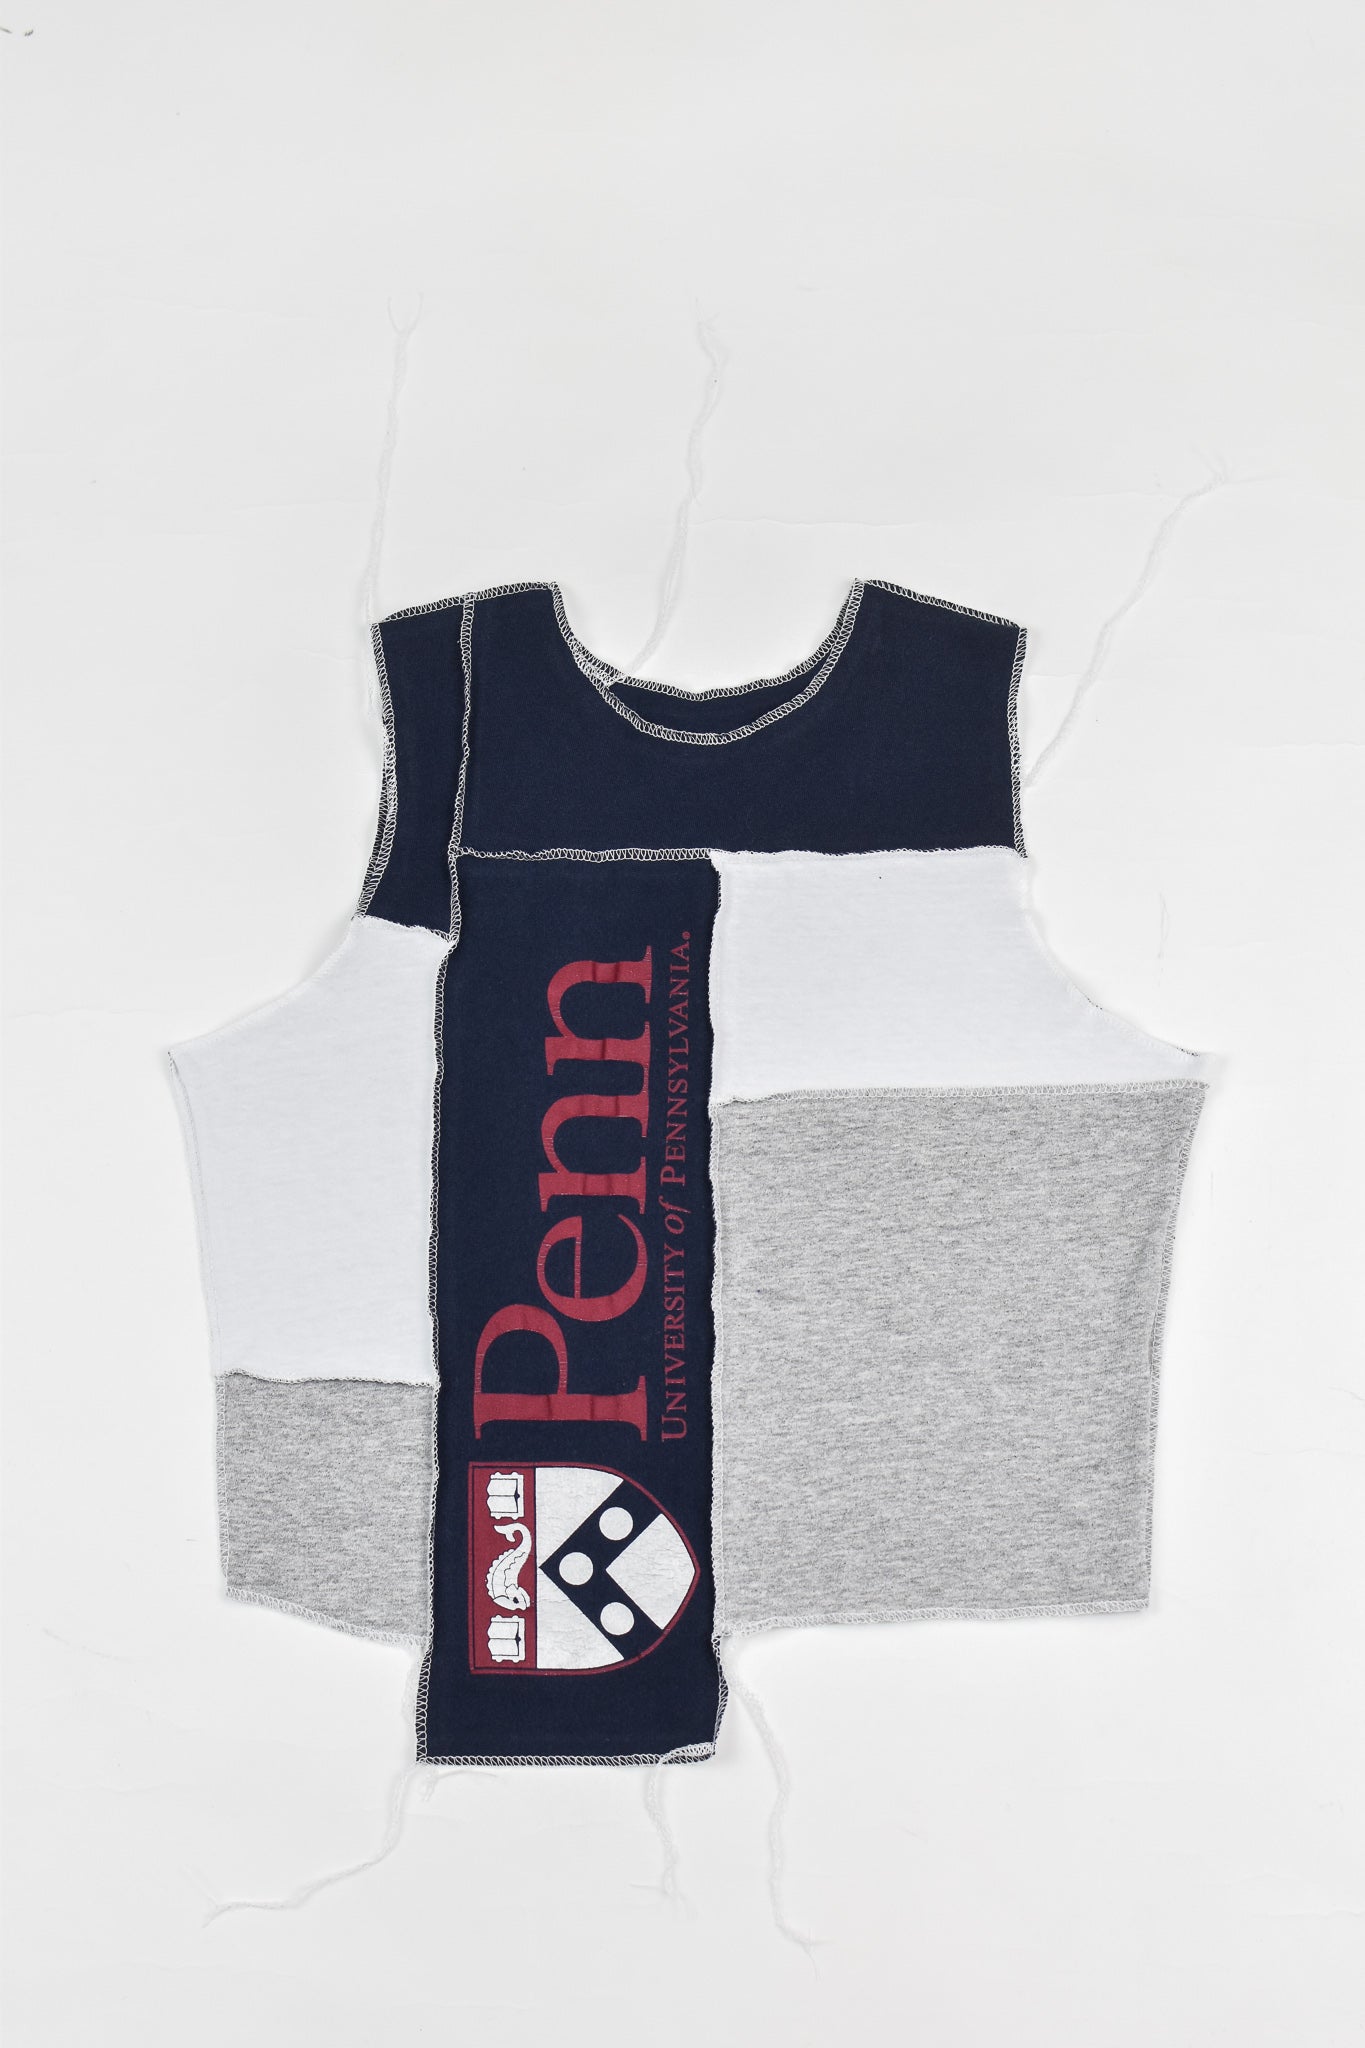 Upcycled Upenn Scrappy Tank Top